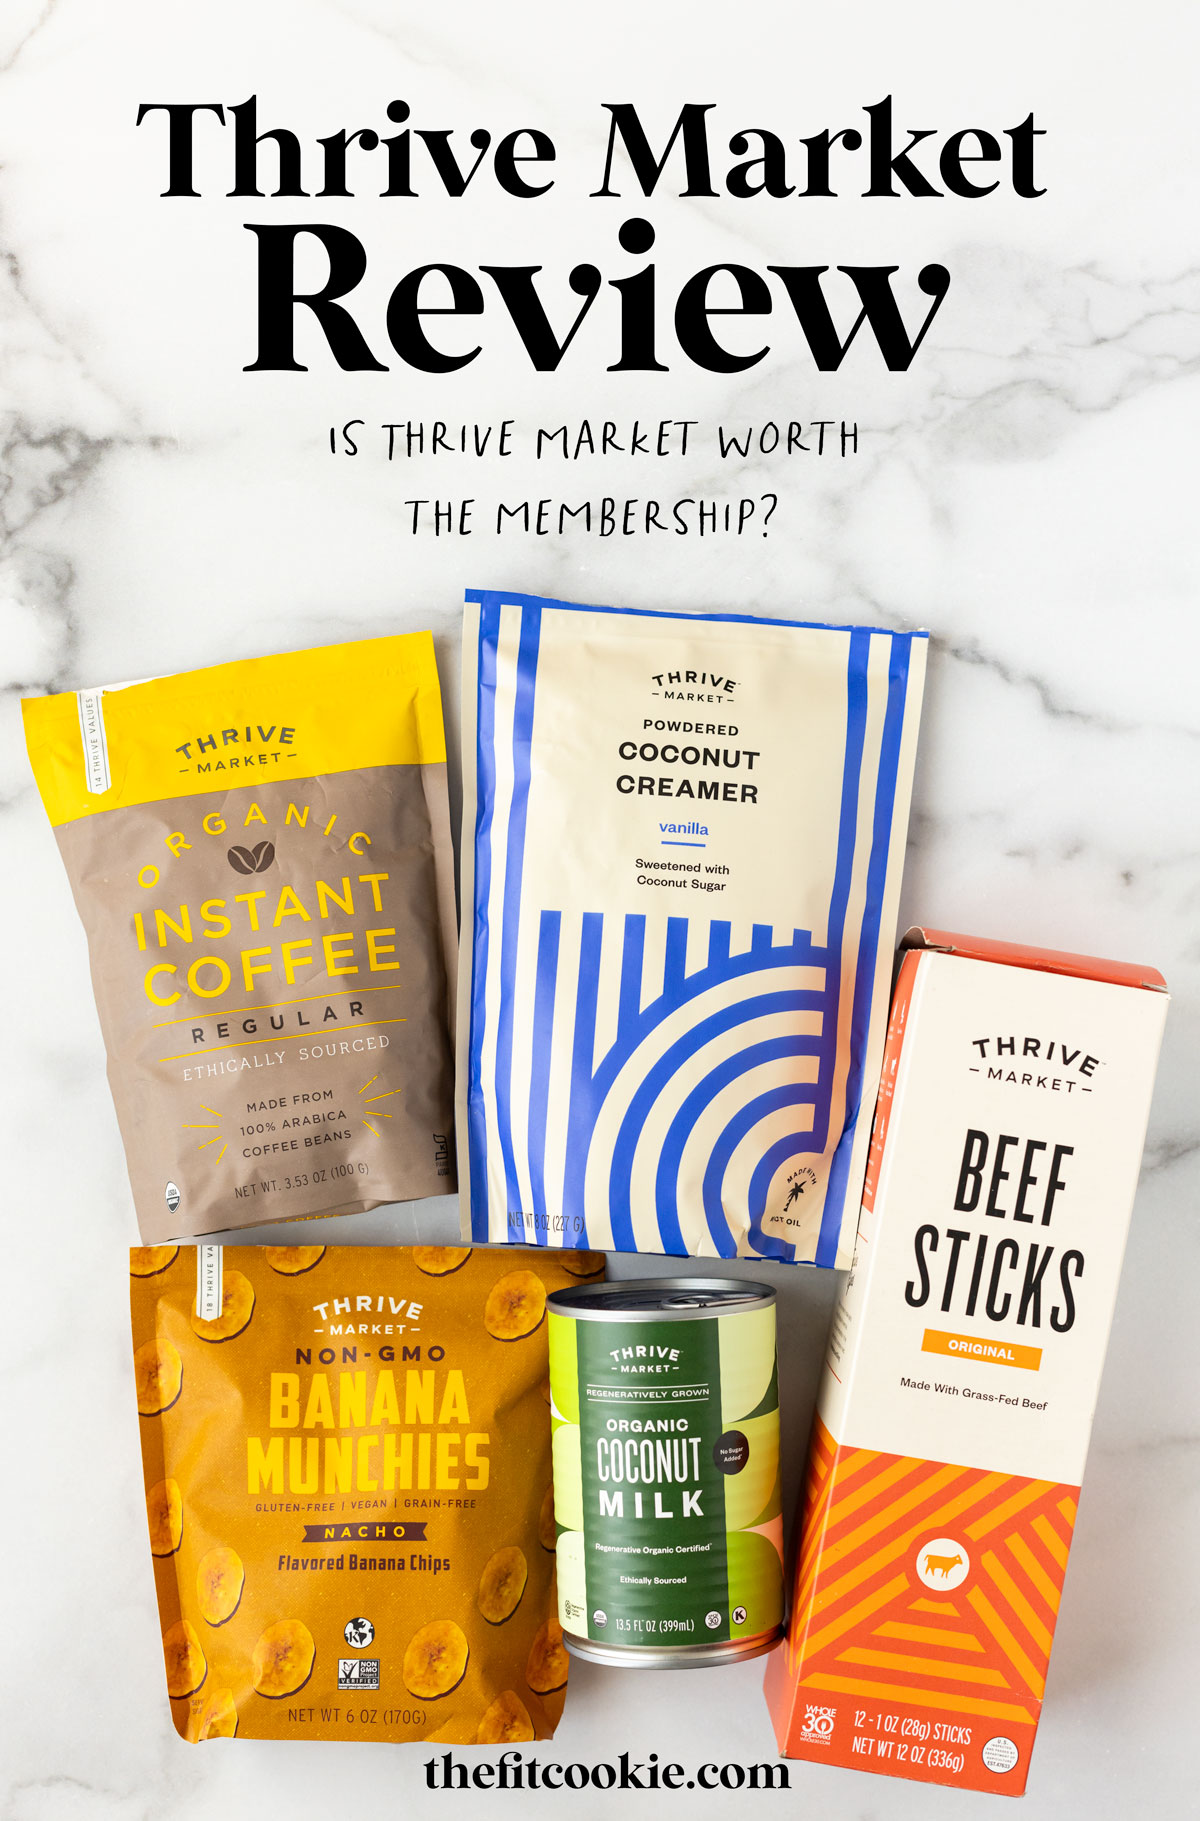 Photo of thrive market branded products with text overlay that says "thrive market review: is thrive market worth the membership?".